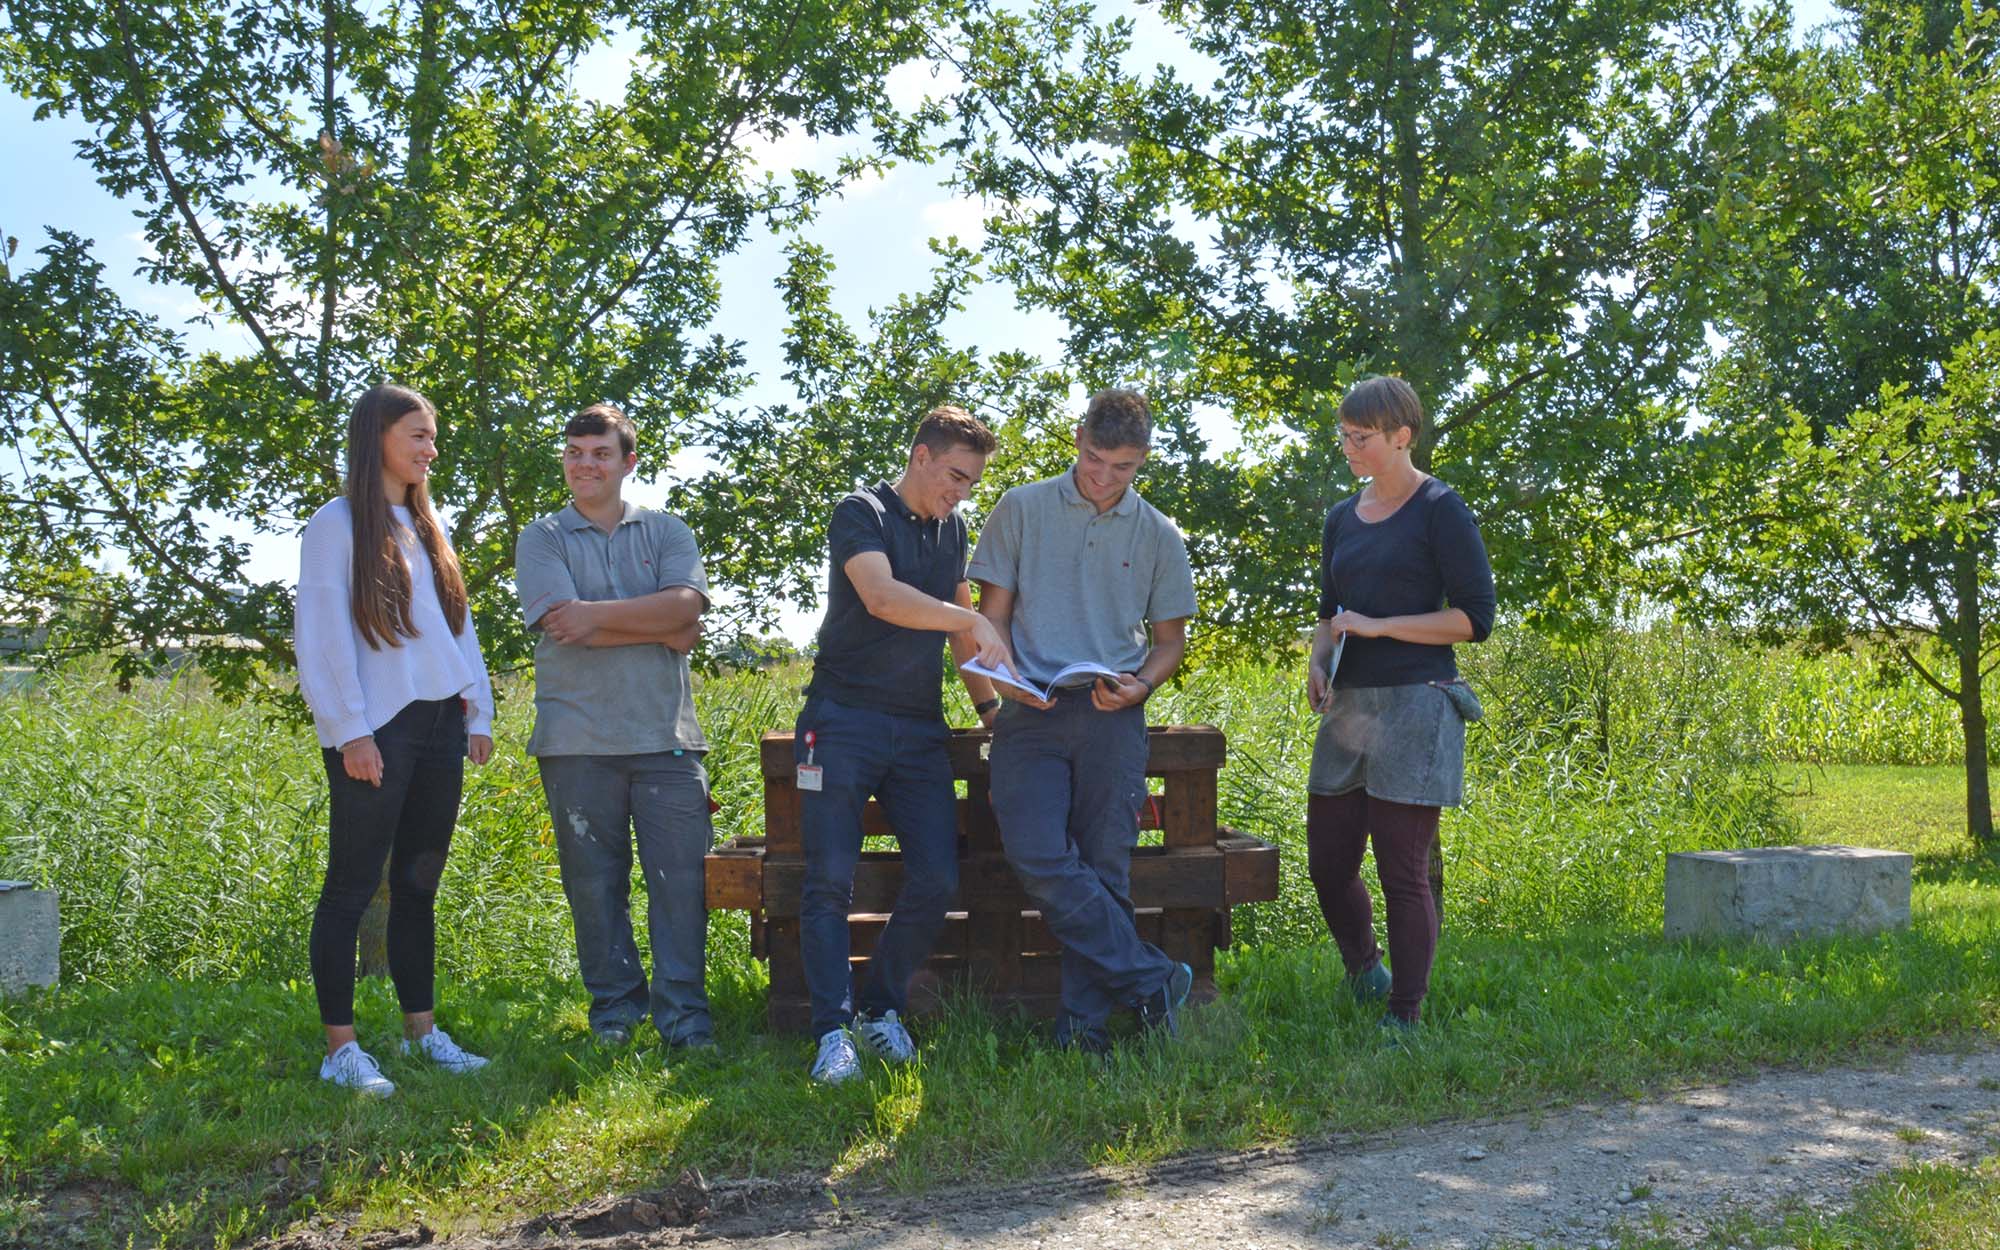 Andrea Wadenstorfer, Biodiversity Consultant at the Lower Nature Conservation Authority in the Donau-Ries district office, accompanied the trainees to the biotope and explained which birdhouses were suitable for the regional bird species.